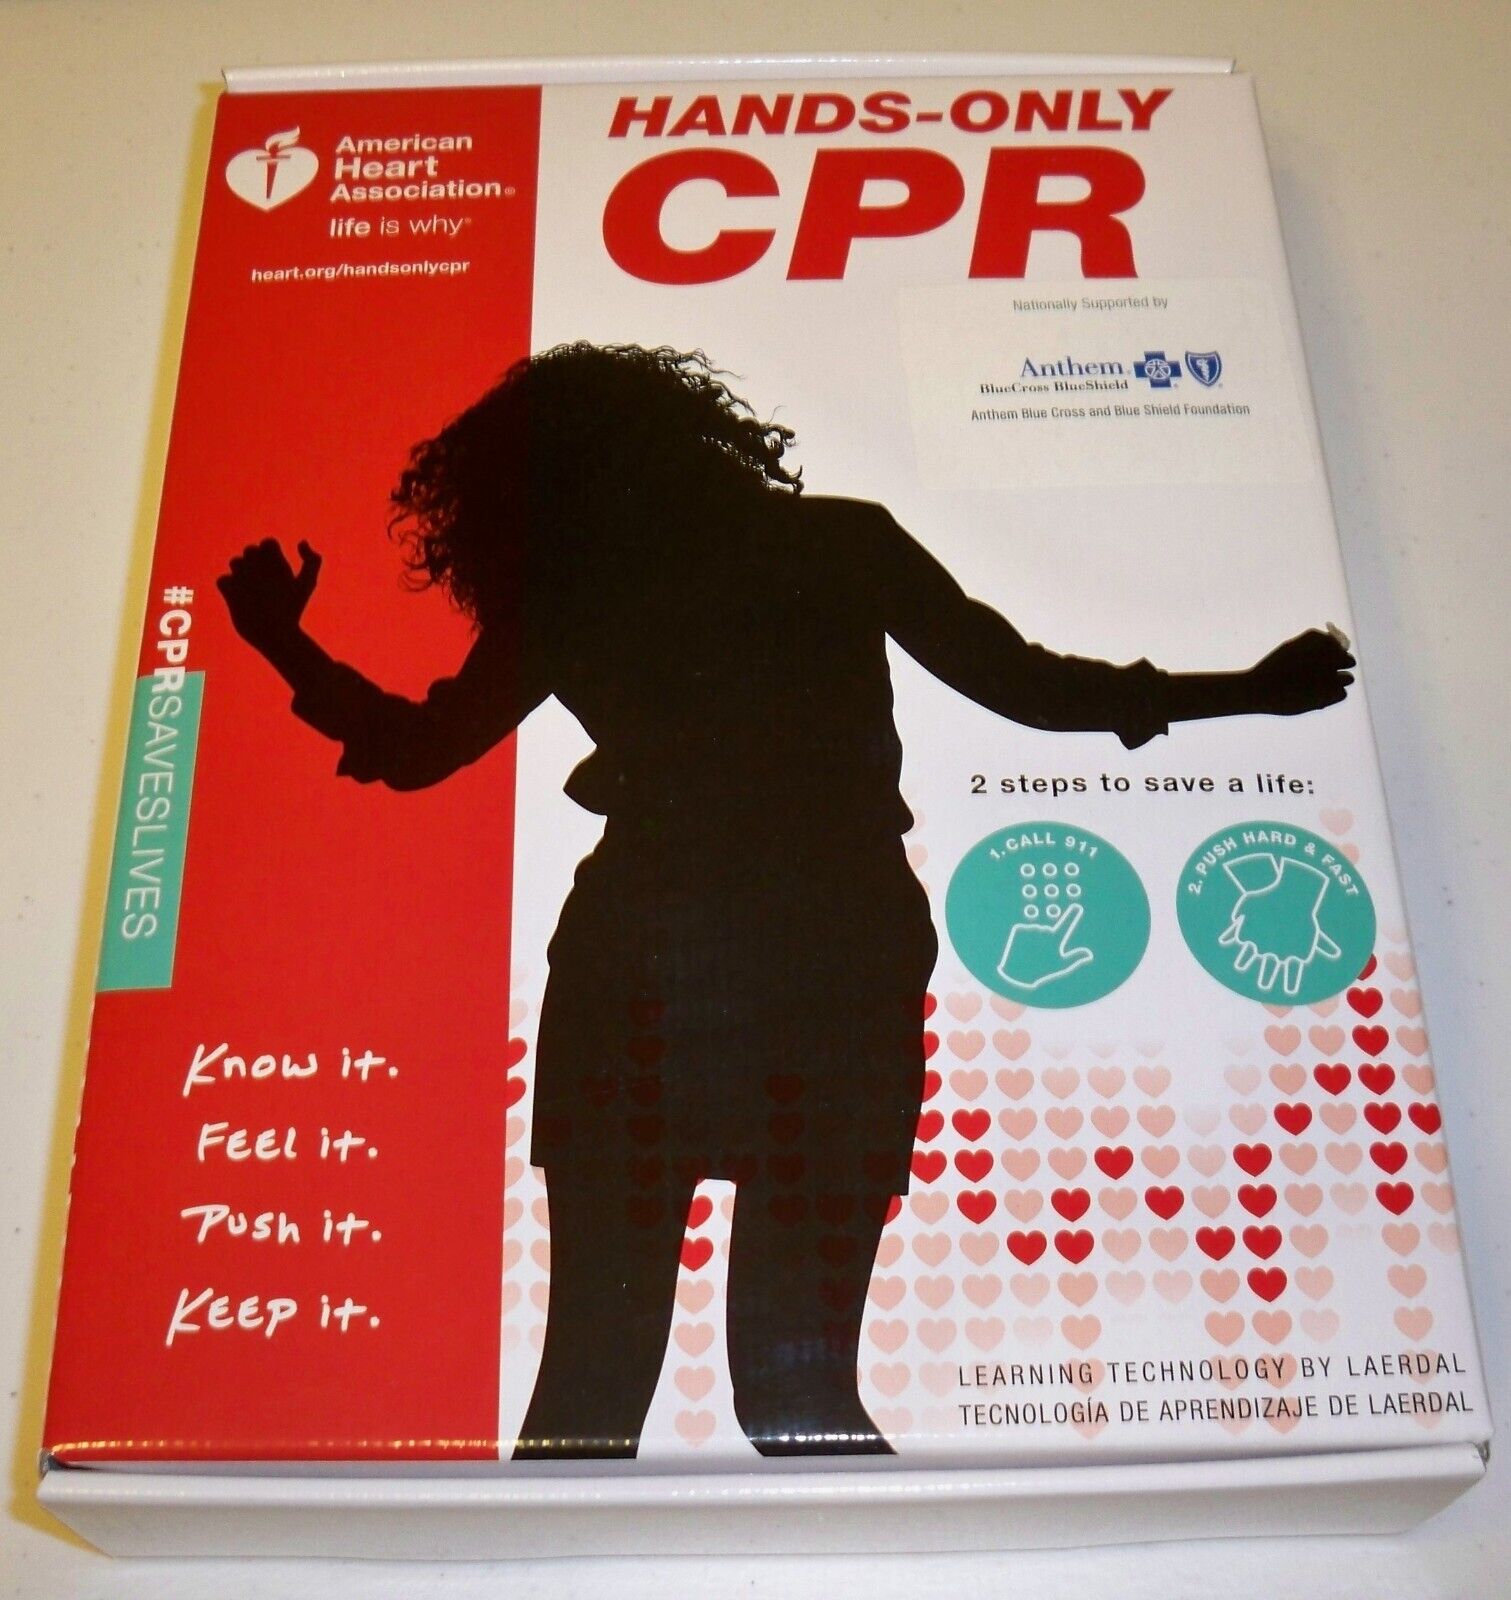 Hands-Only CPR - American Heart Association Kit